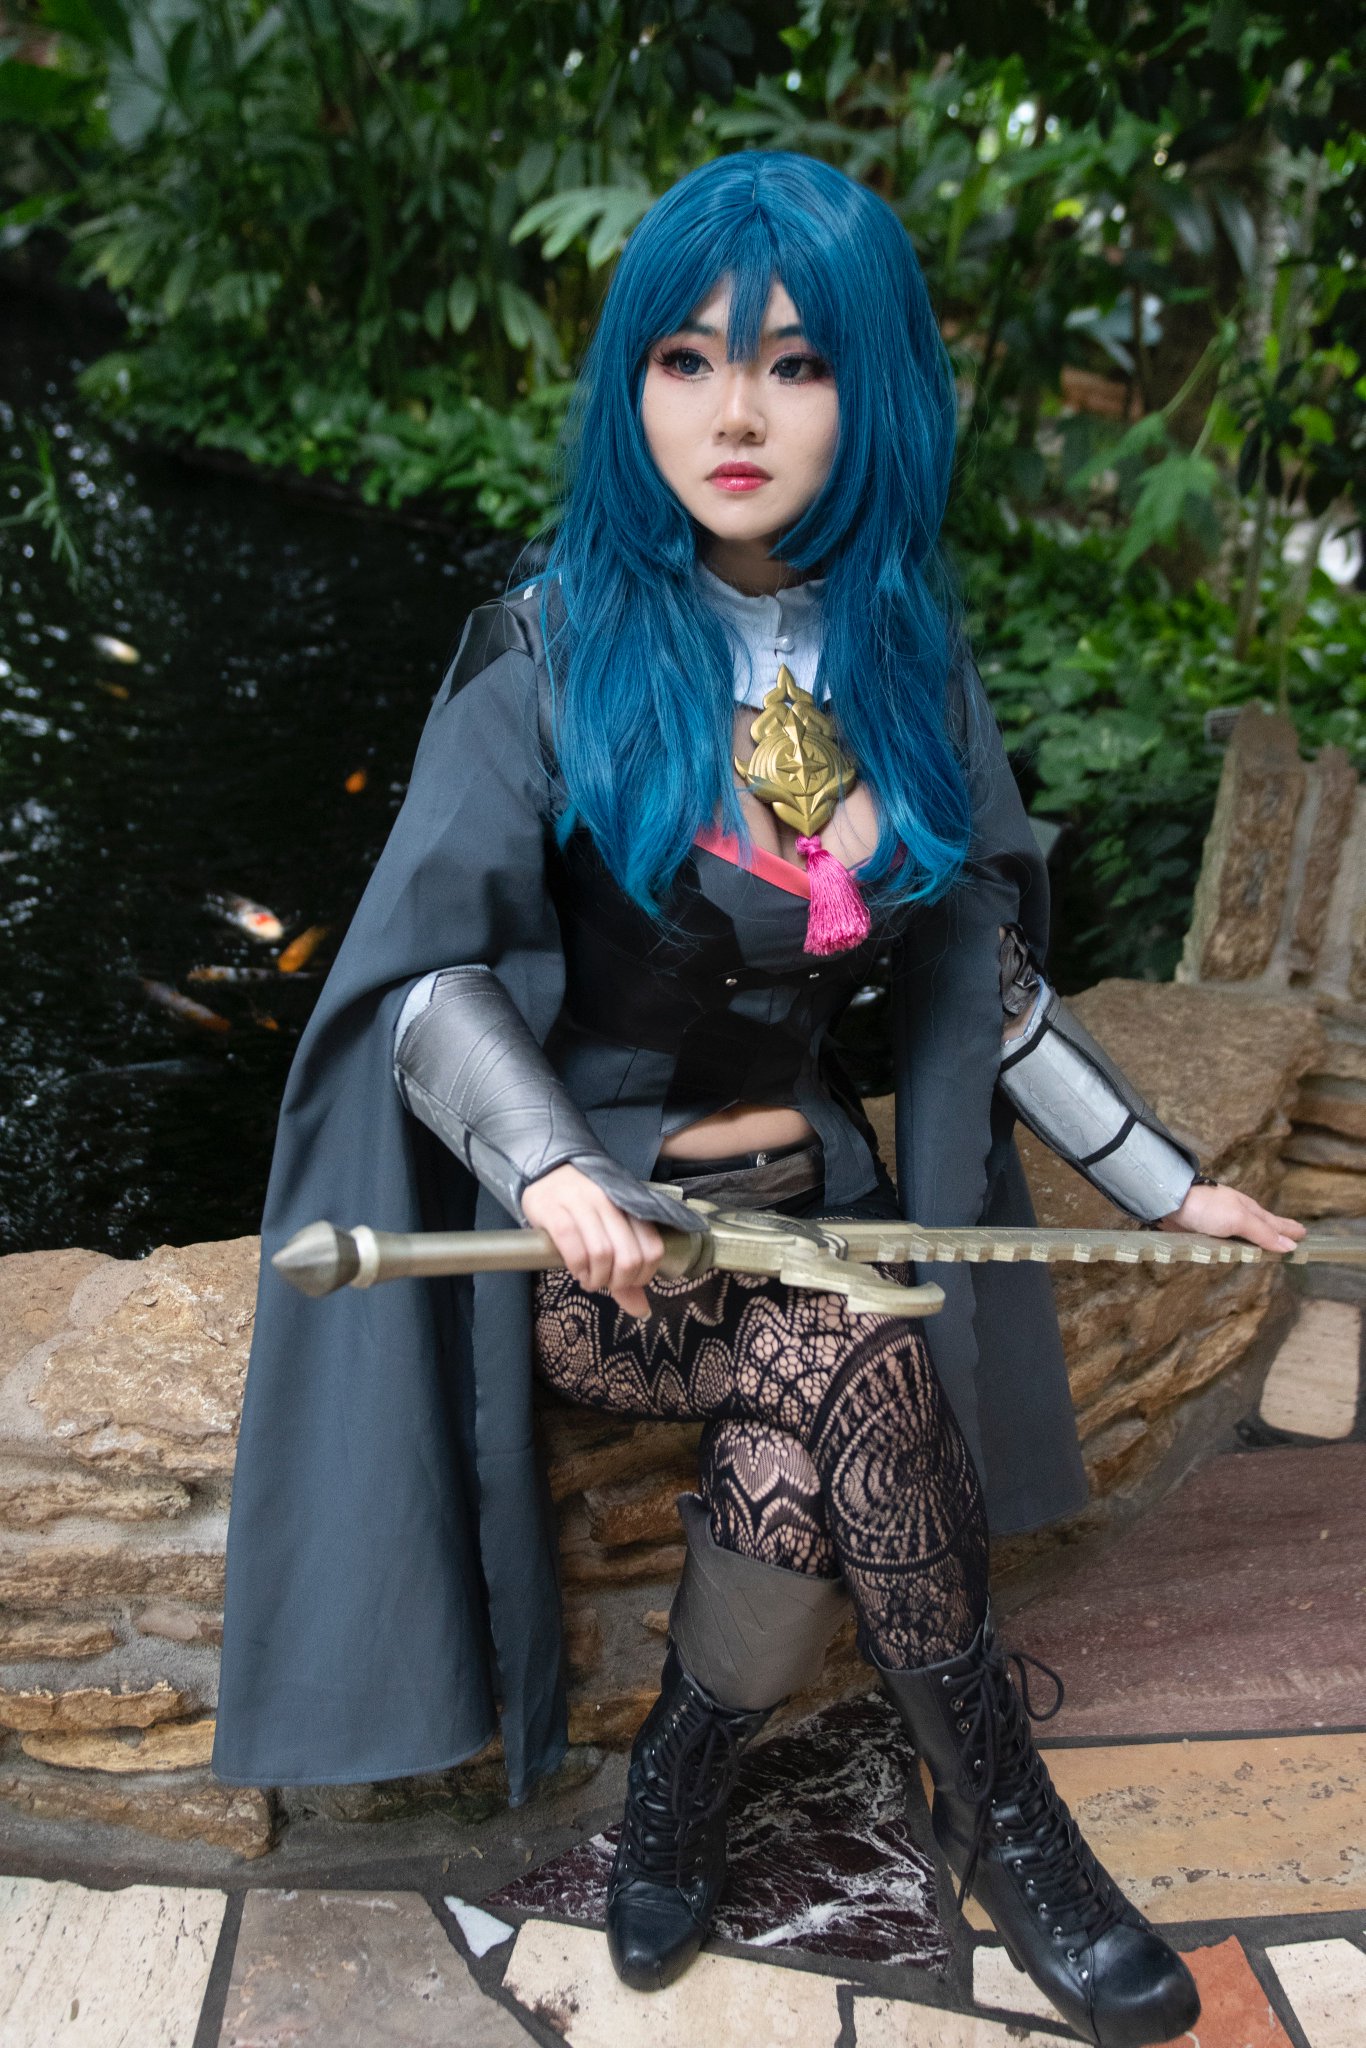 UNa 👉 ??? on Twitter: "Did a photoshoot yesterday of Byleth 